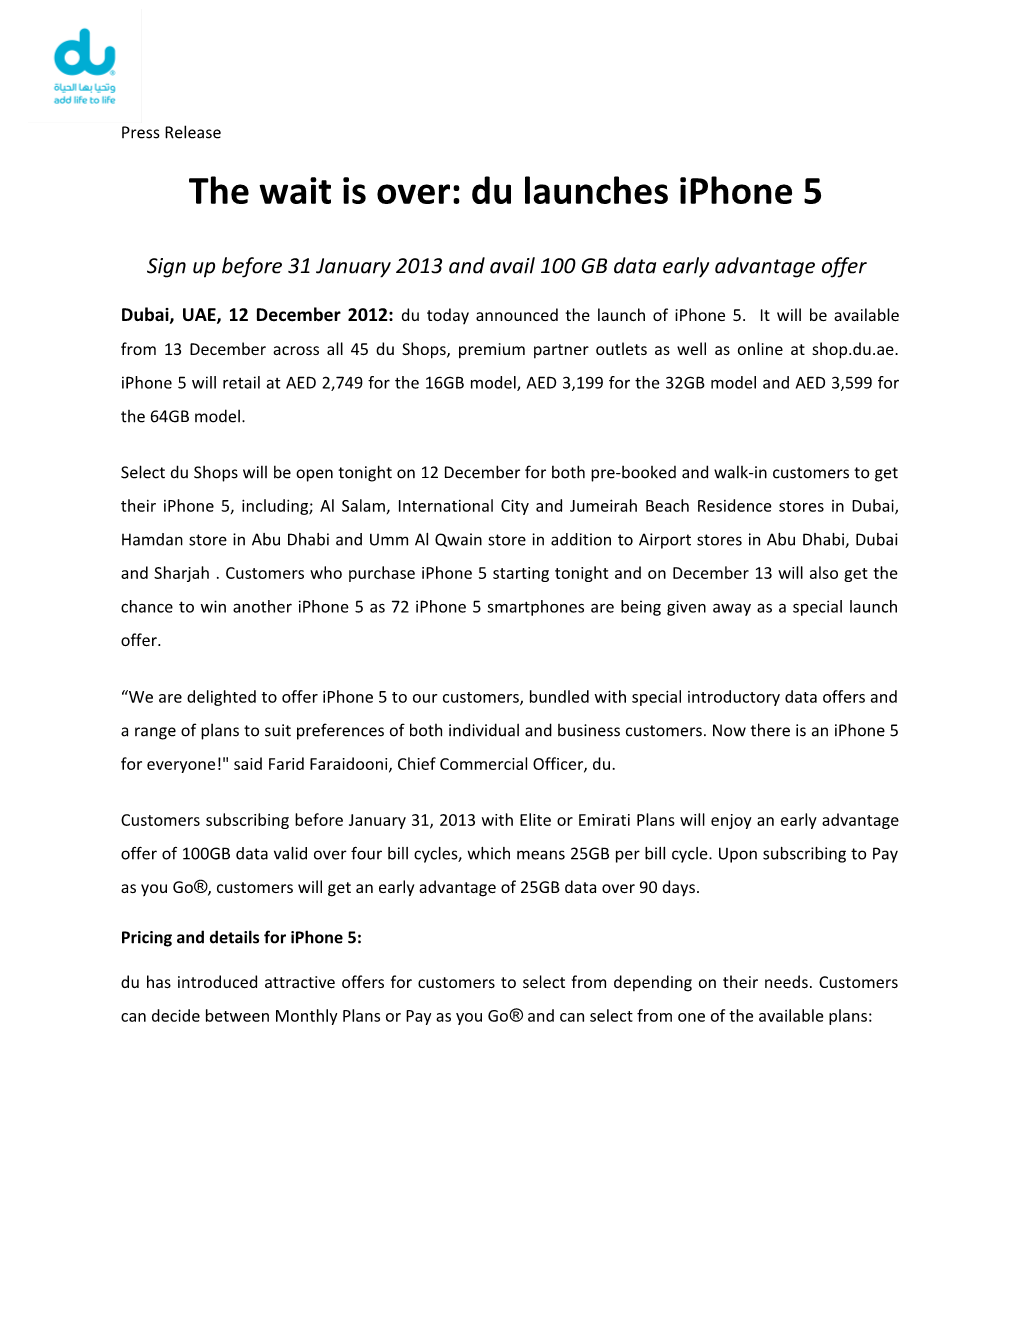 The Wait Is Over: Du Launches Iphone 5